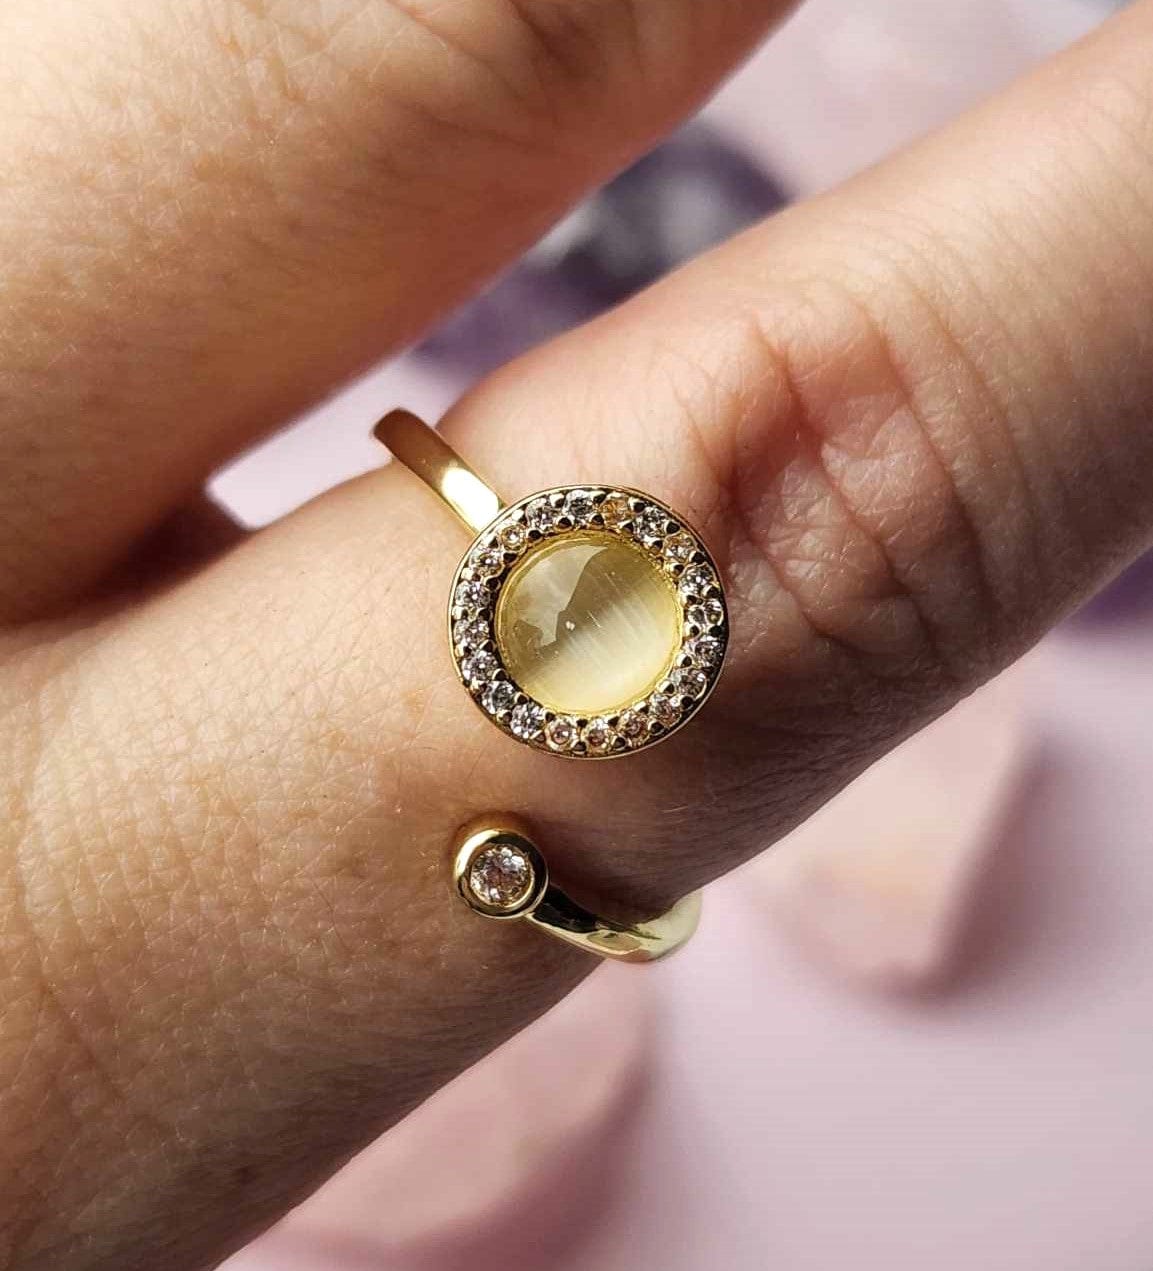 The Moonstone Collection - Gold Plated Moonstone Fidget Spinner Ring - Mindful Rings